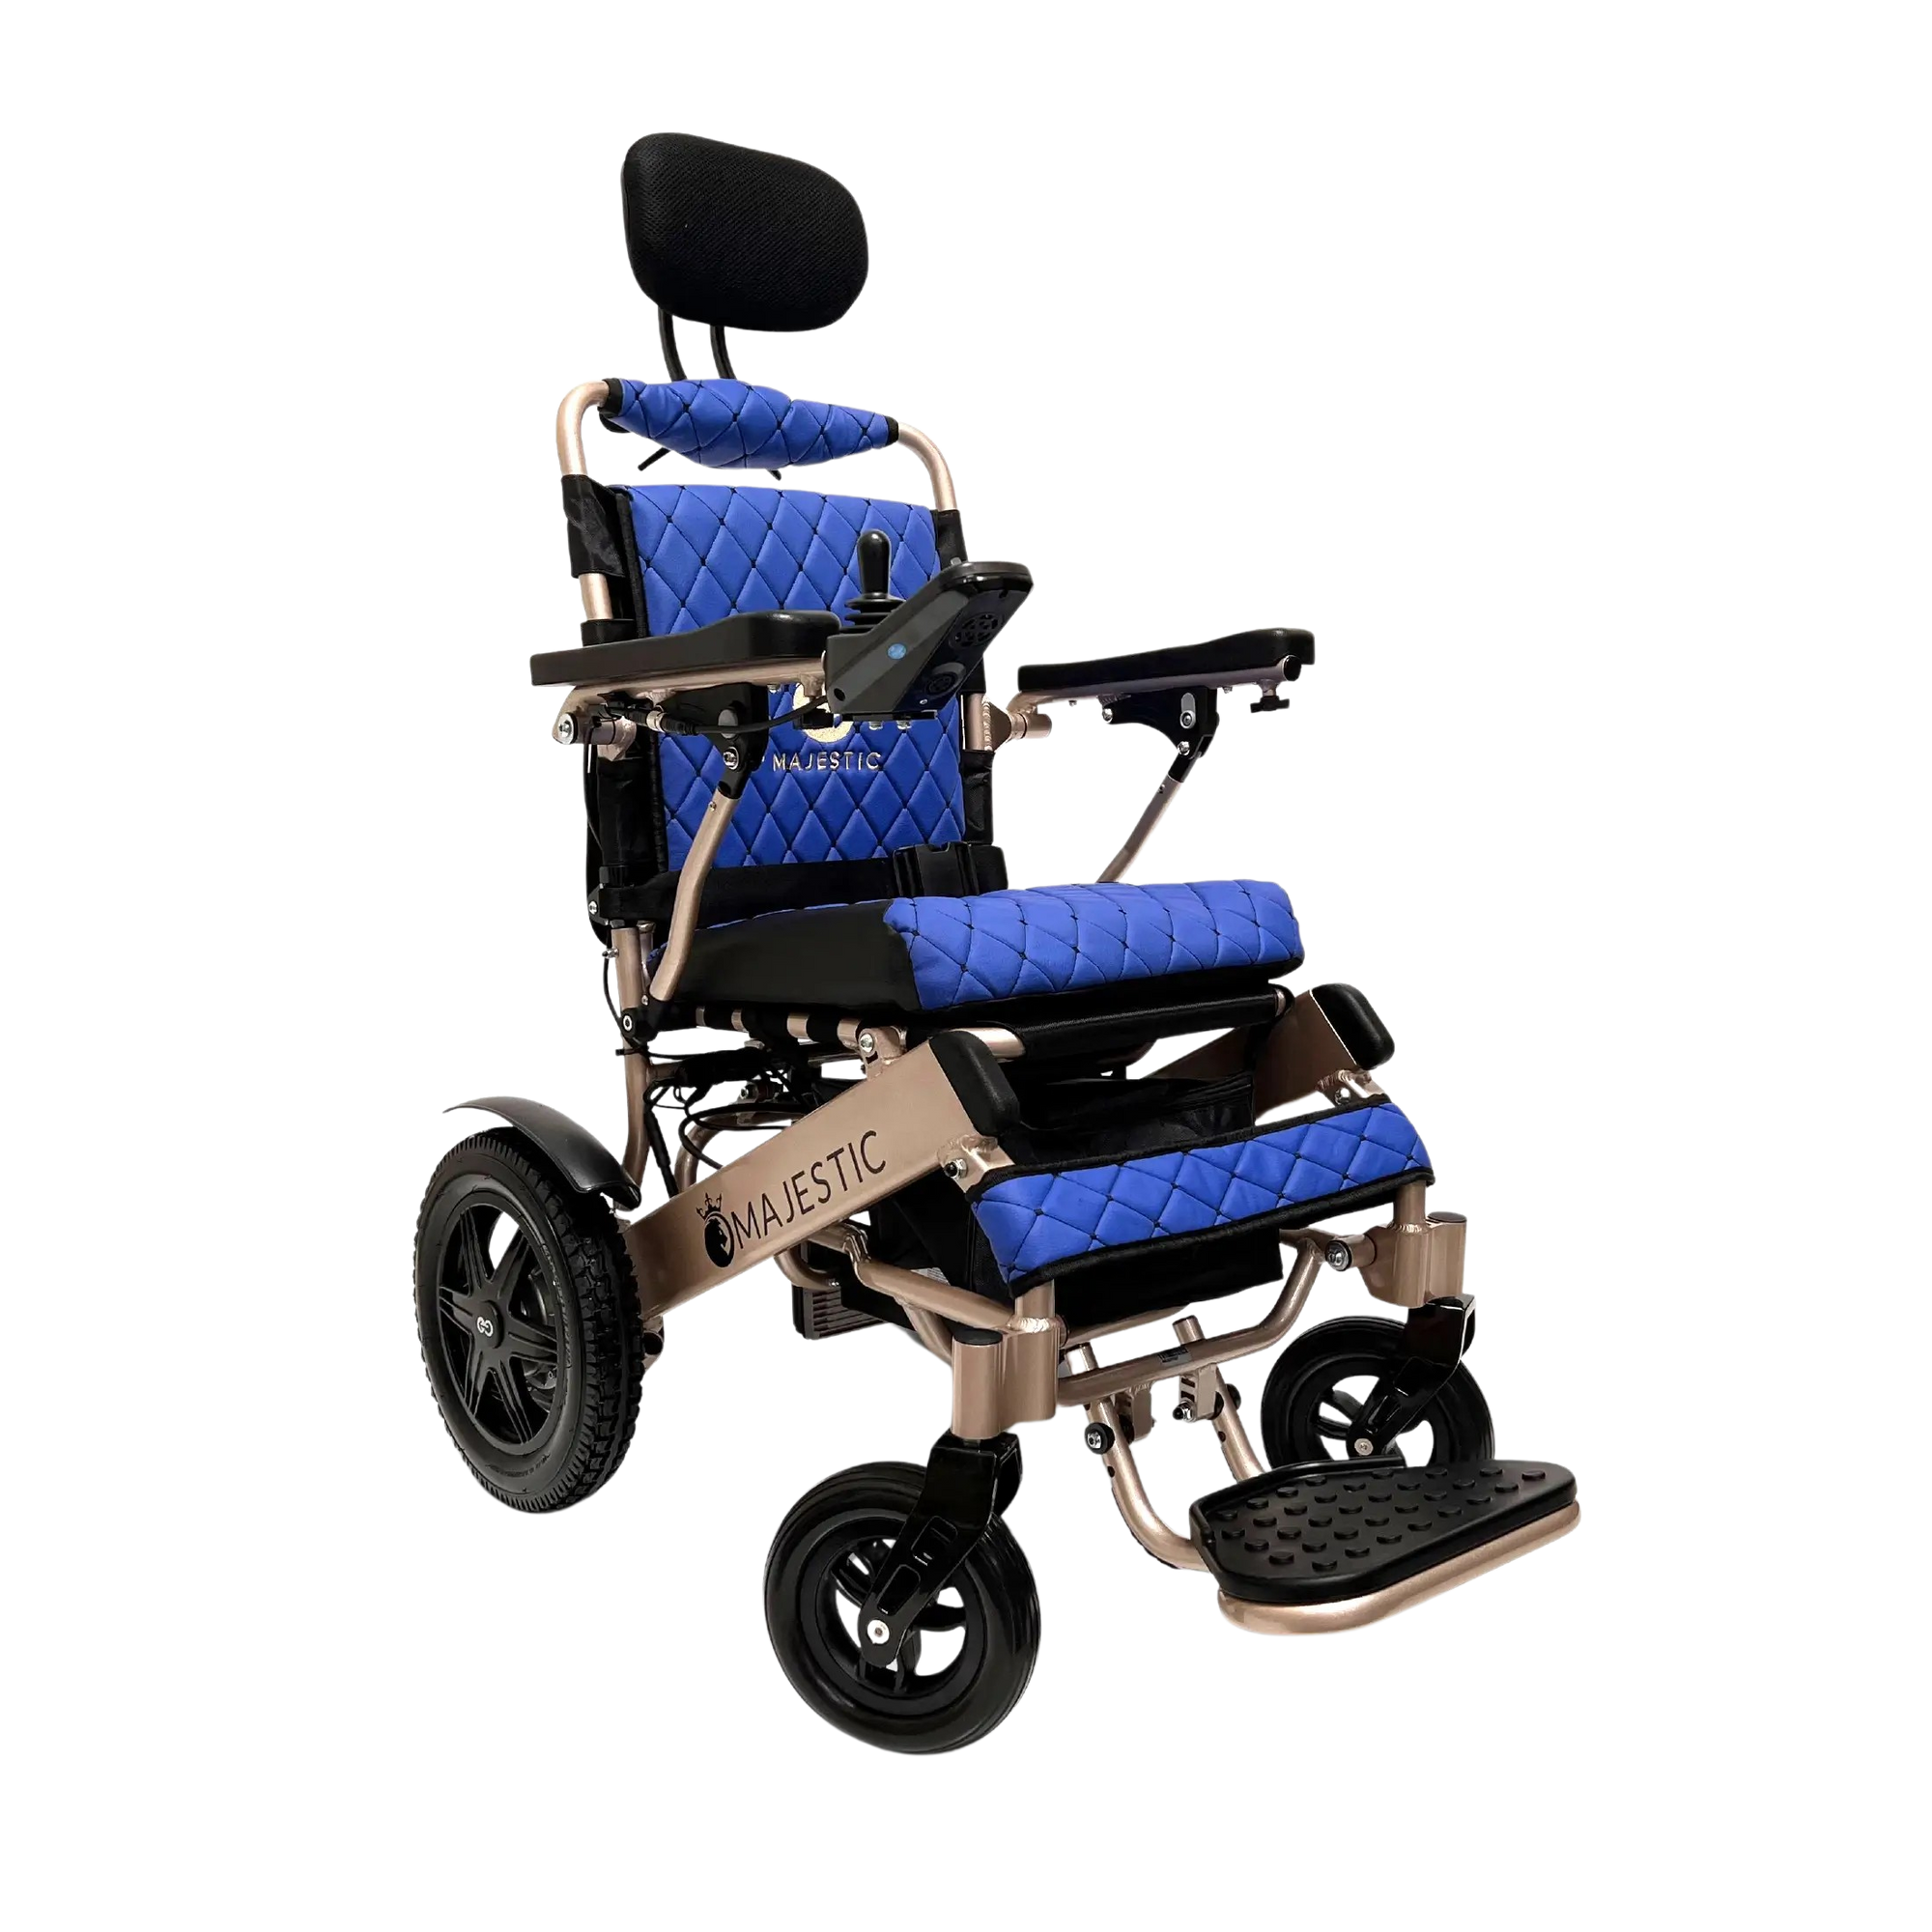 ComfyGO IQ-9000 Auto Recline Majestic Remote Controlled Travel Manual Folding Electric Wheelchair New